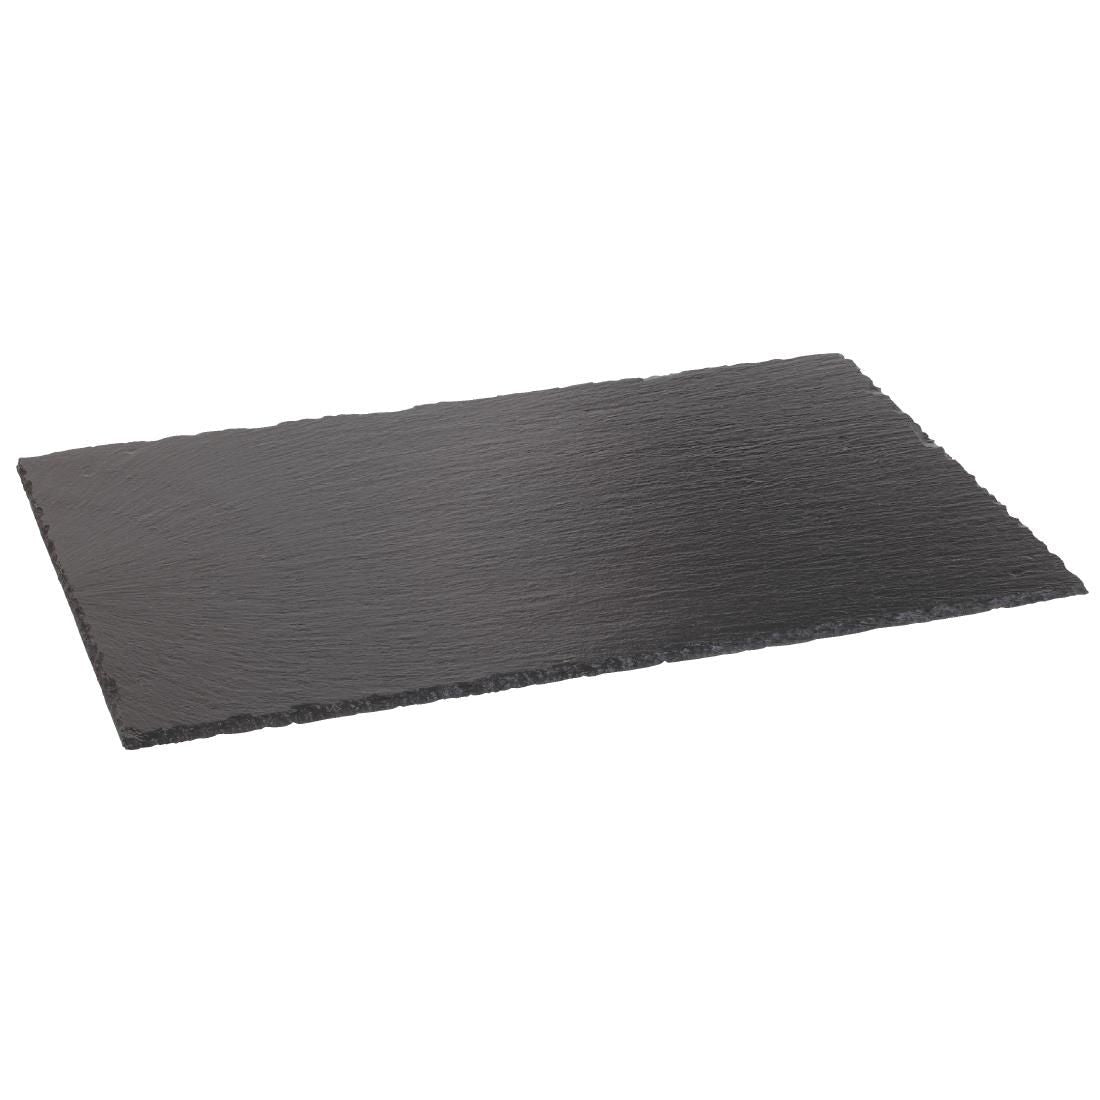 CK407 Olympia Natural Slate Boards GN 1/4 (Pack of 2)